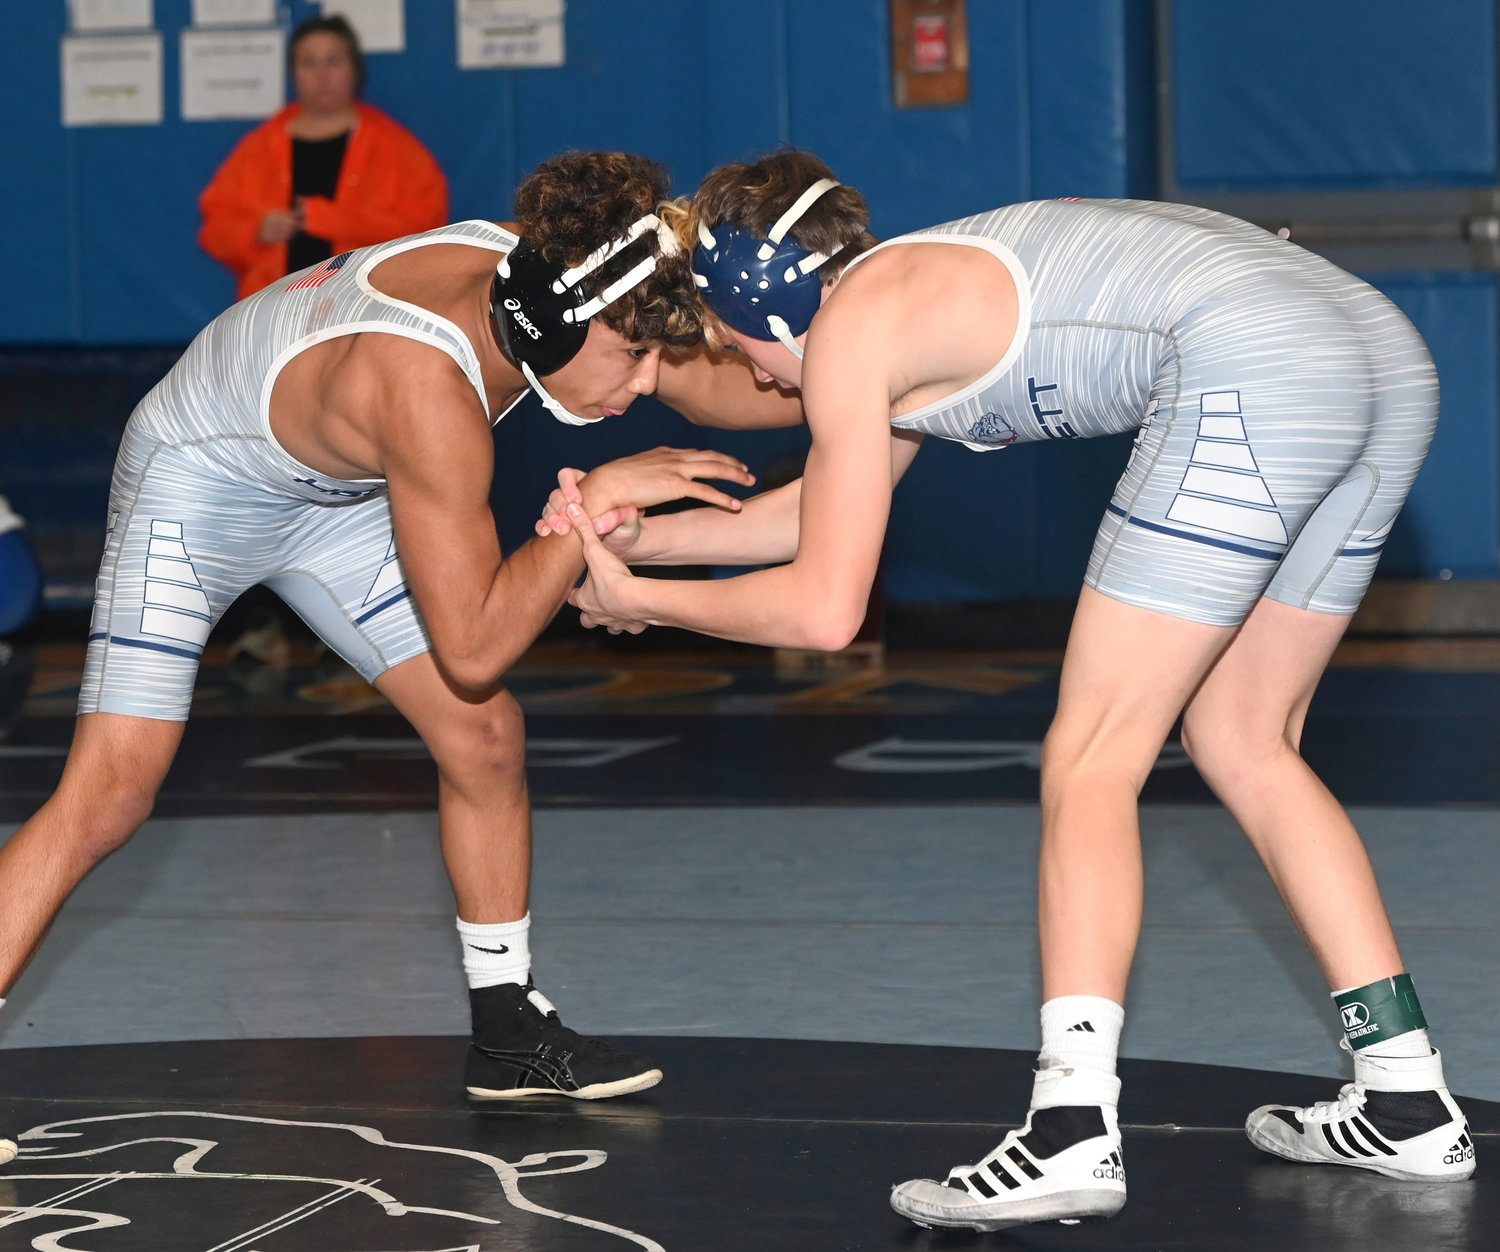 Hewlett teammates Eric Gendlin, right, and Carlos Salazar met in the 118-pound final at the Battle at the Beach with Gendlin prevailing.